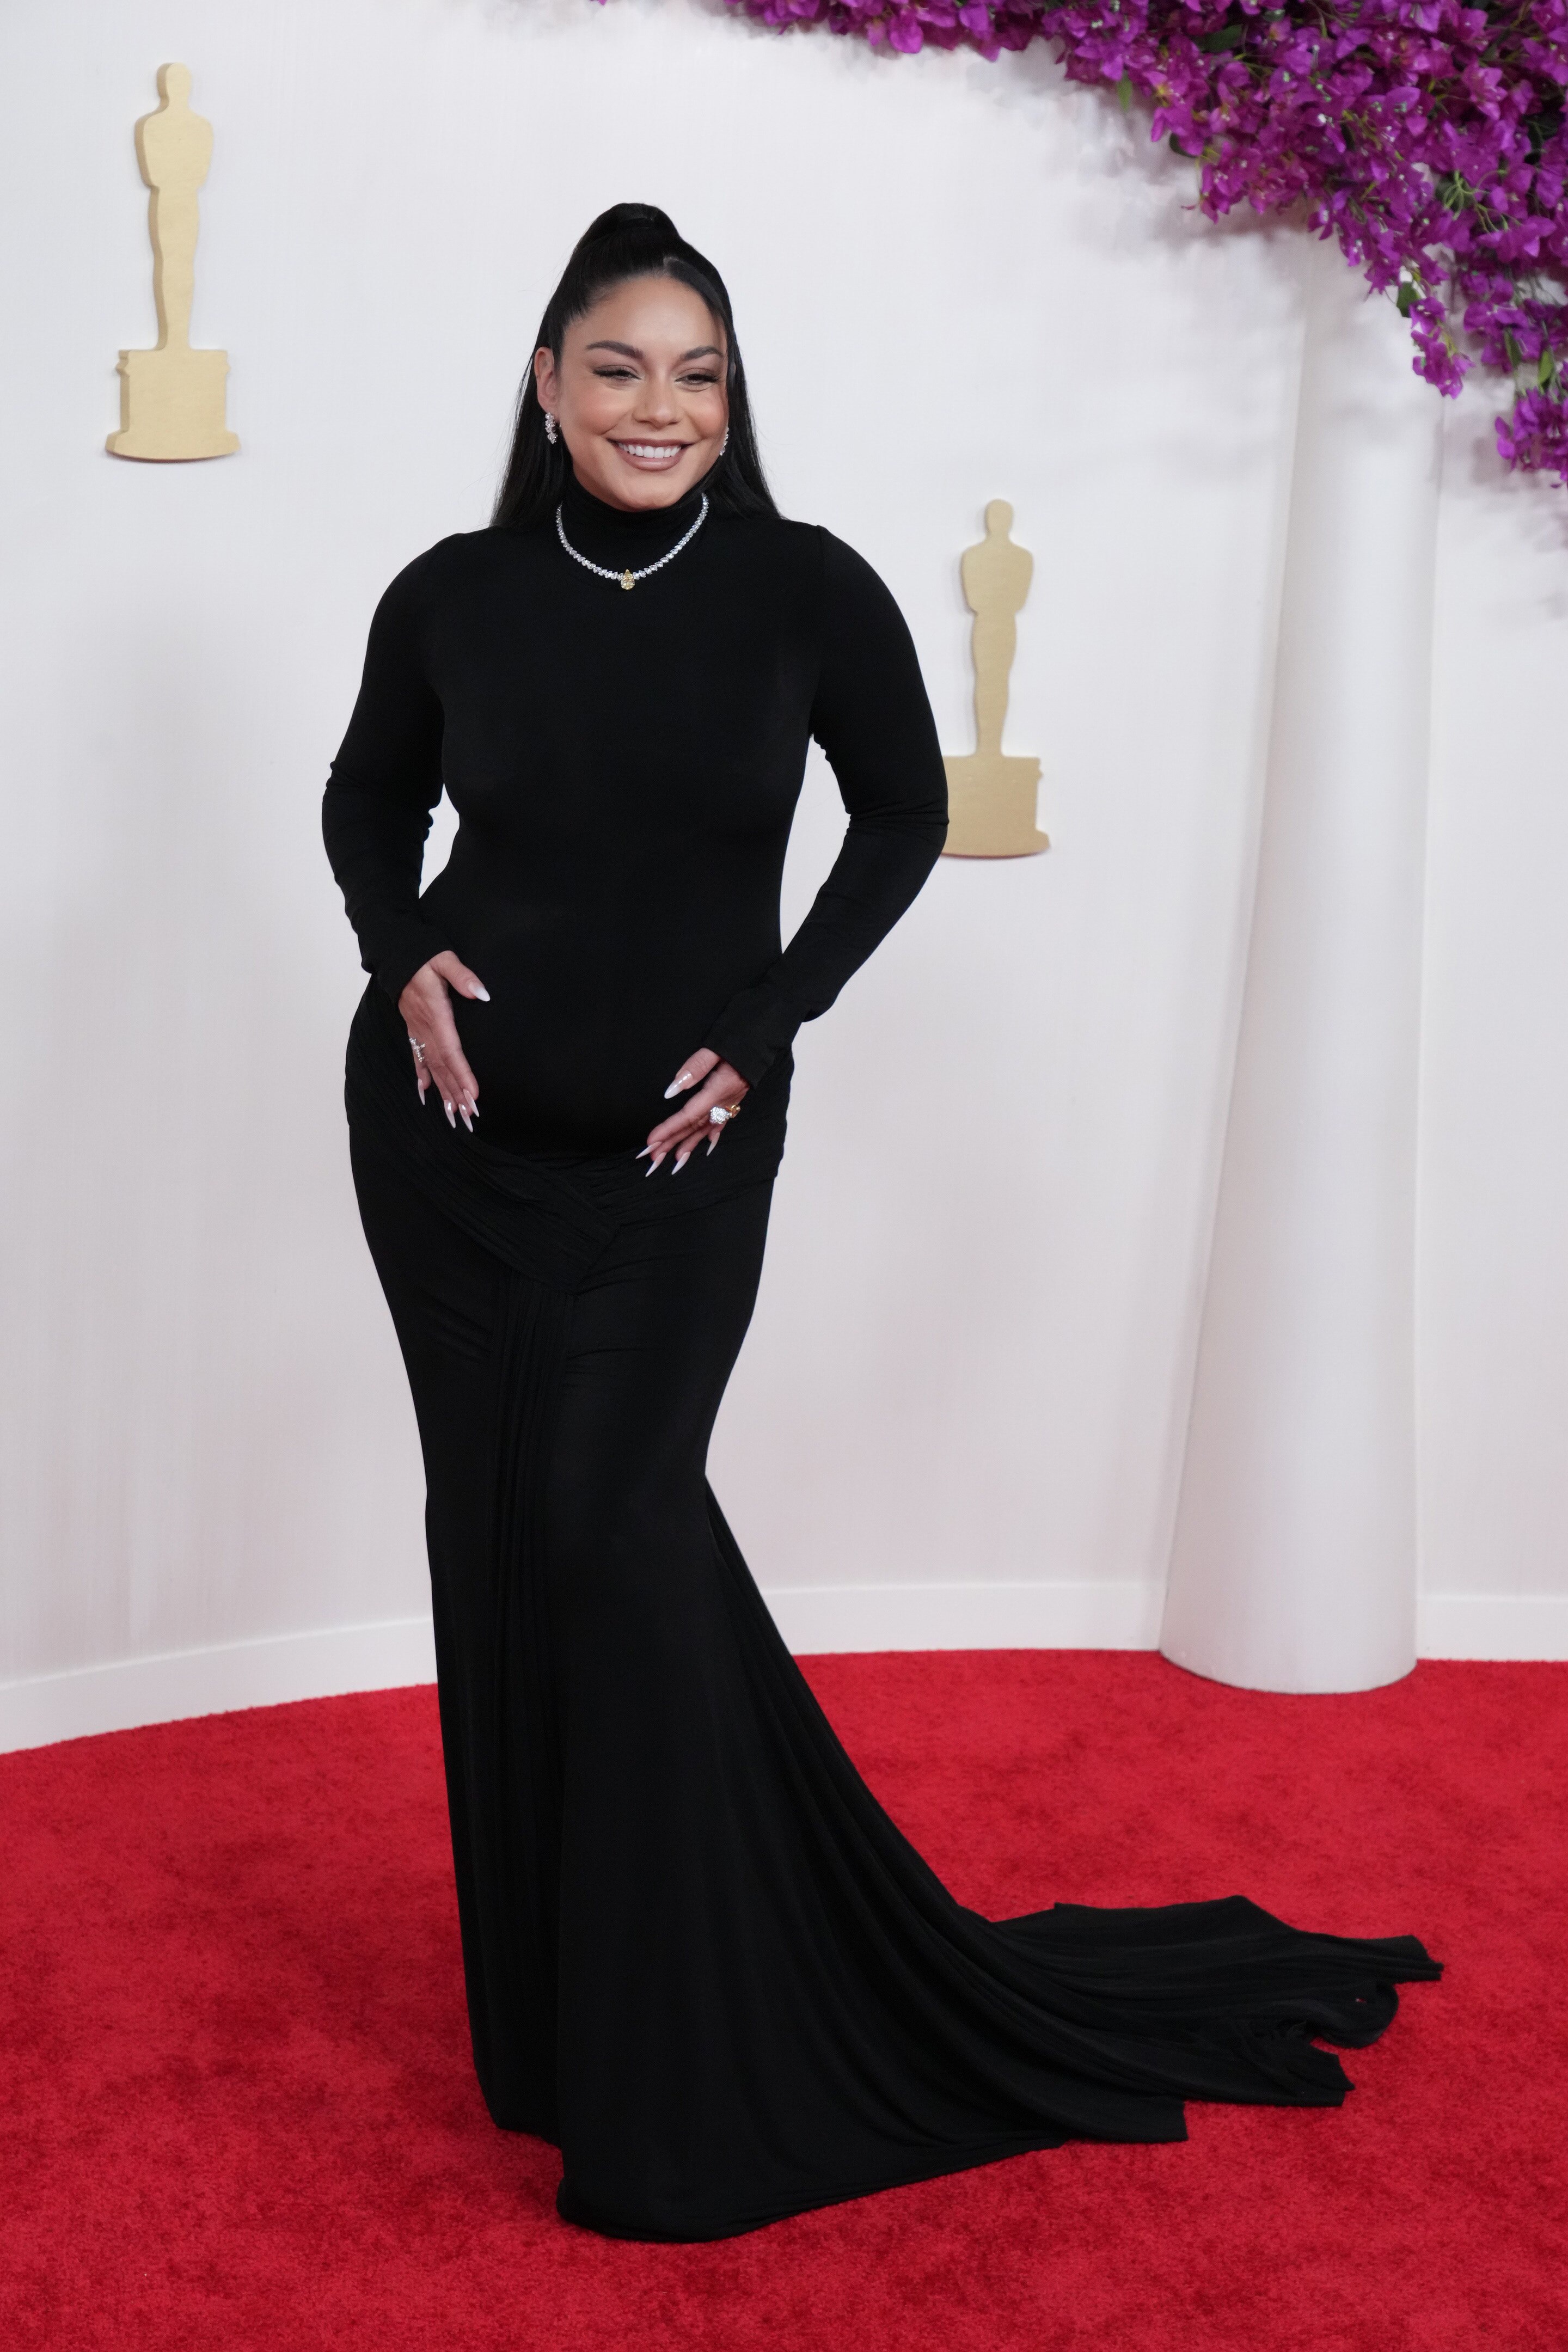 Actress Vanessa Hudgens stands on the red carpet at the Oscars